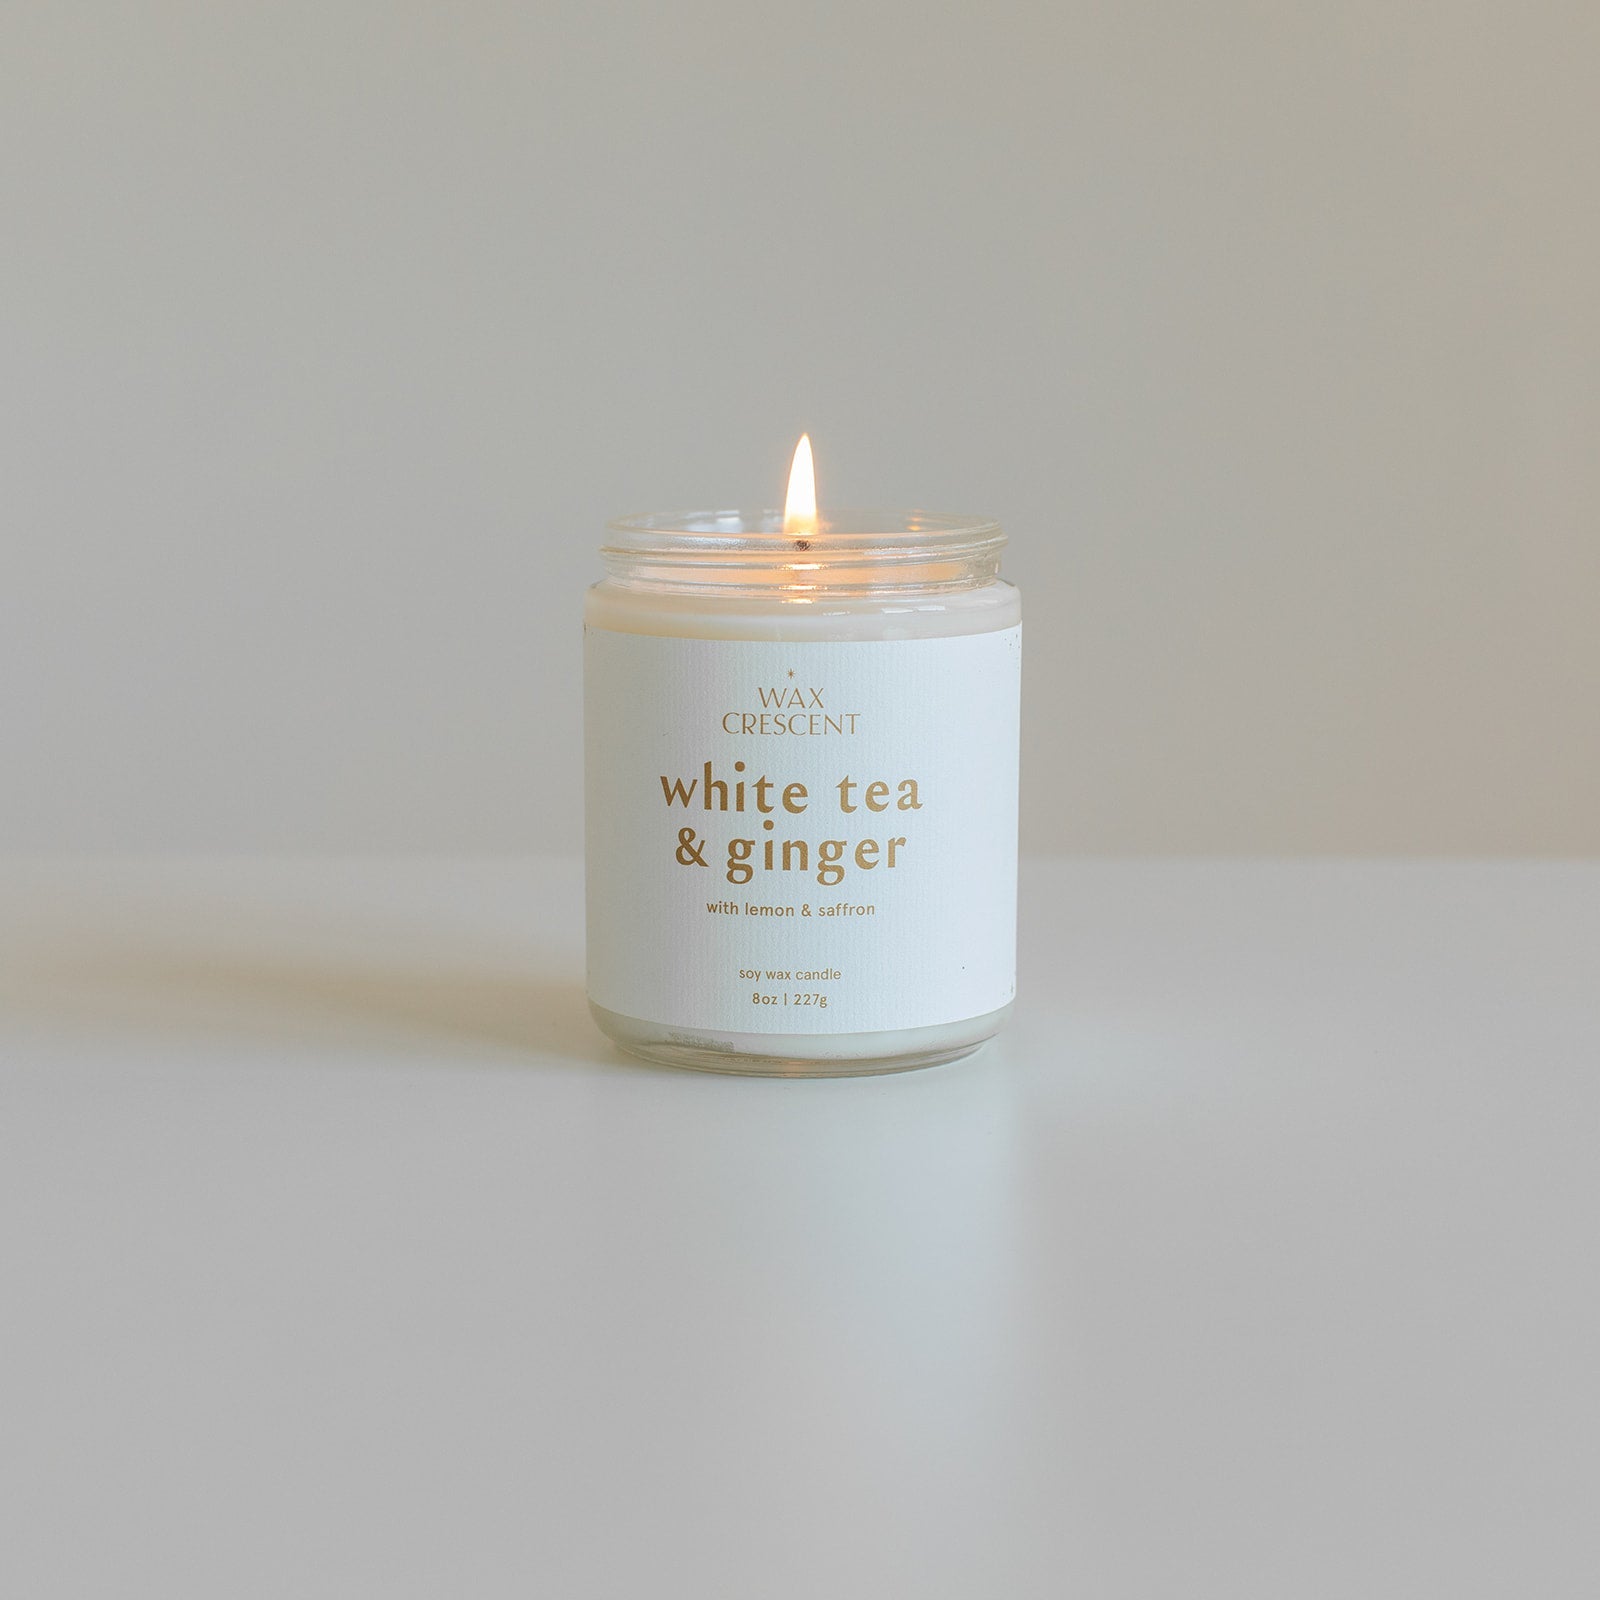 soy wax candles hand poured in small batches using non toxic ingredients available in a monthly subscription box